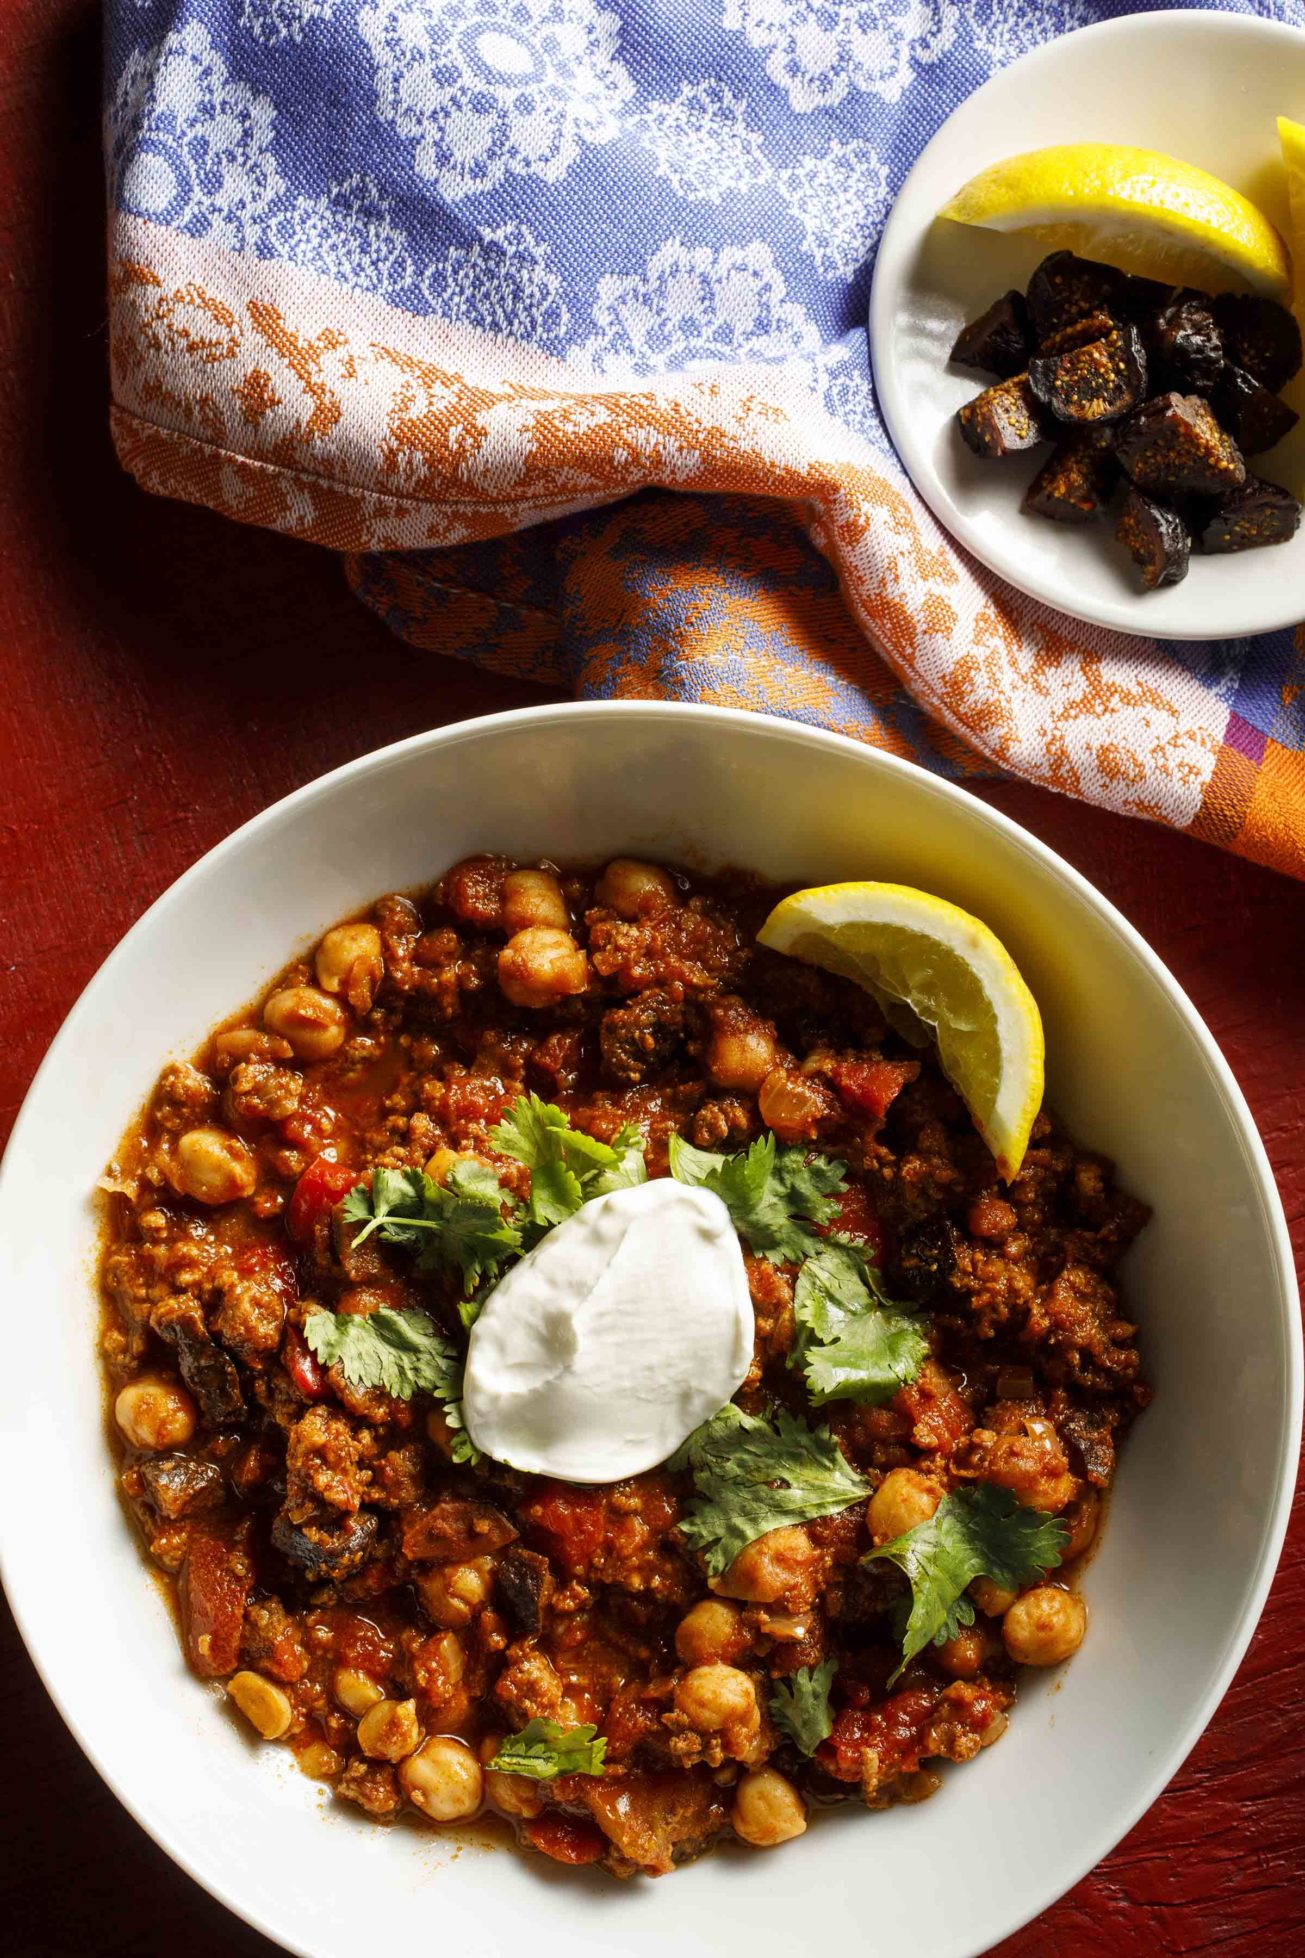 Have you tried garbanzo beans in chili? You'll love the twist on a classic. Moroccan spices & dried figs transform beef chili with chickpeas.